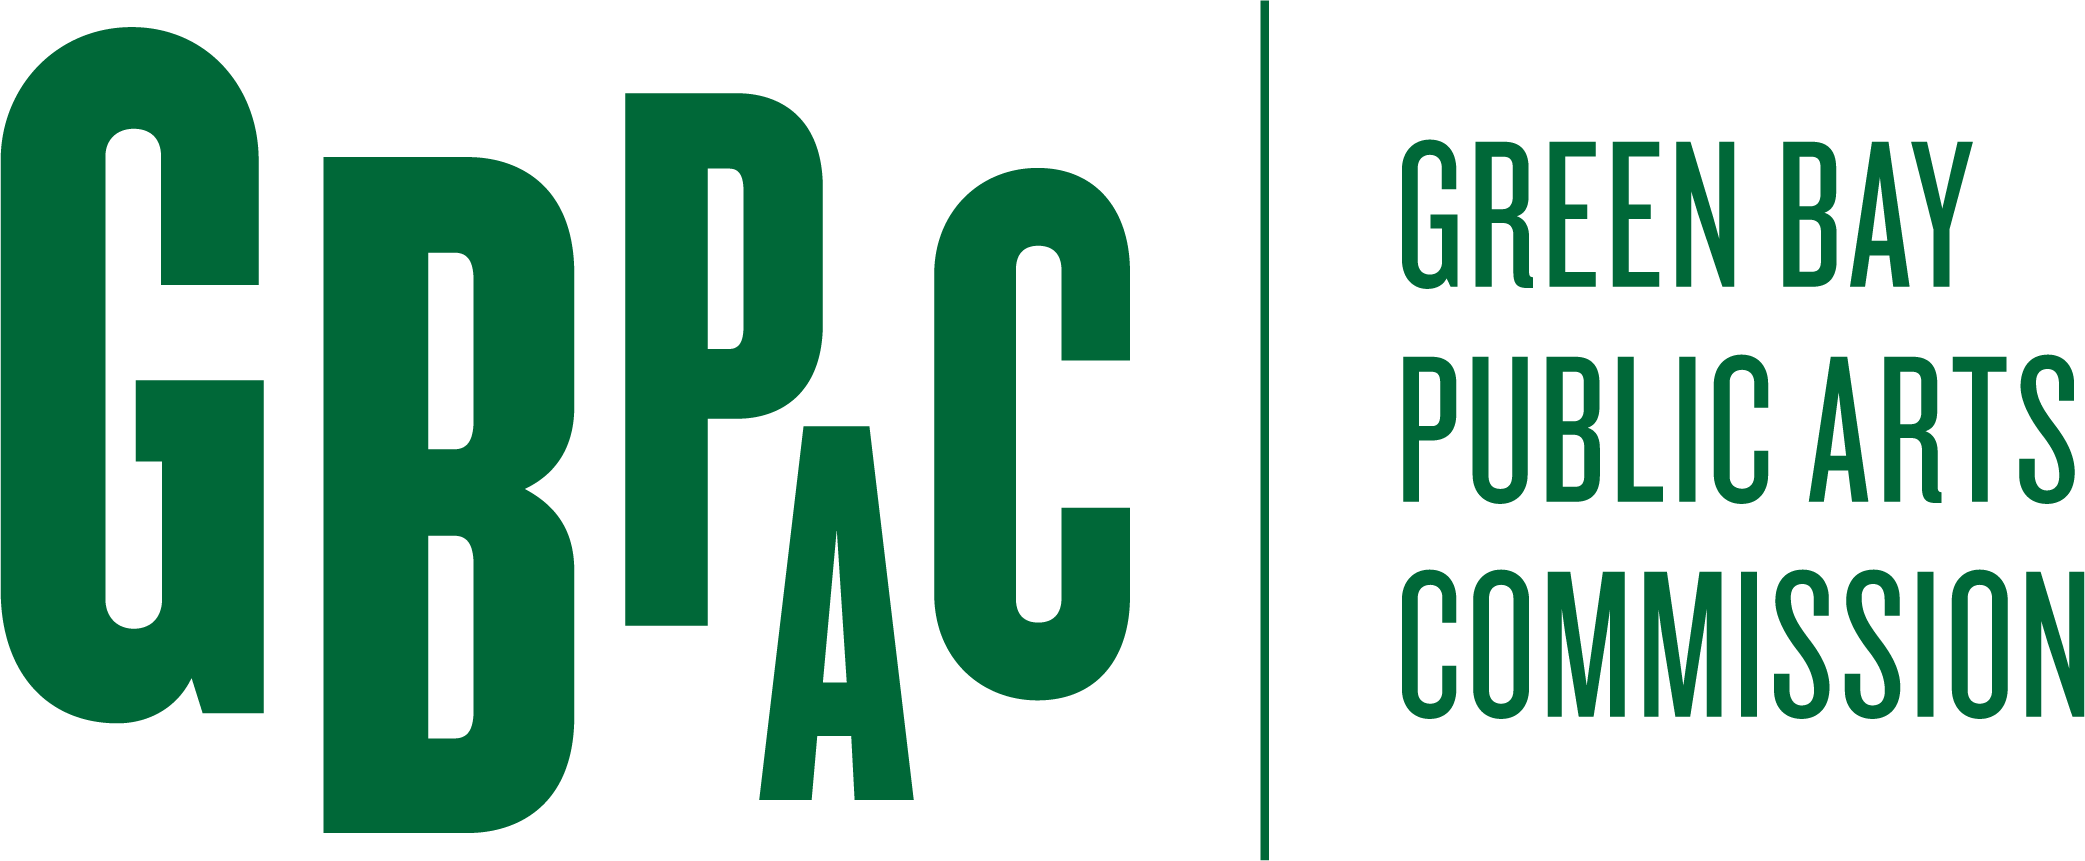 GBPAC - Green Bay Public Arts Commission